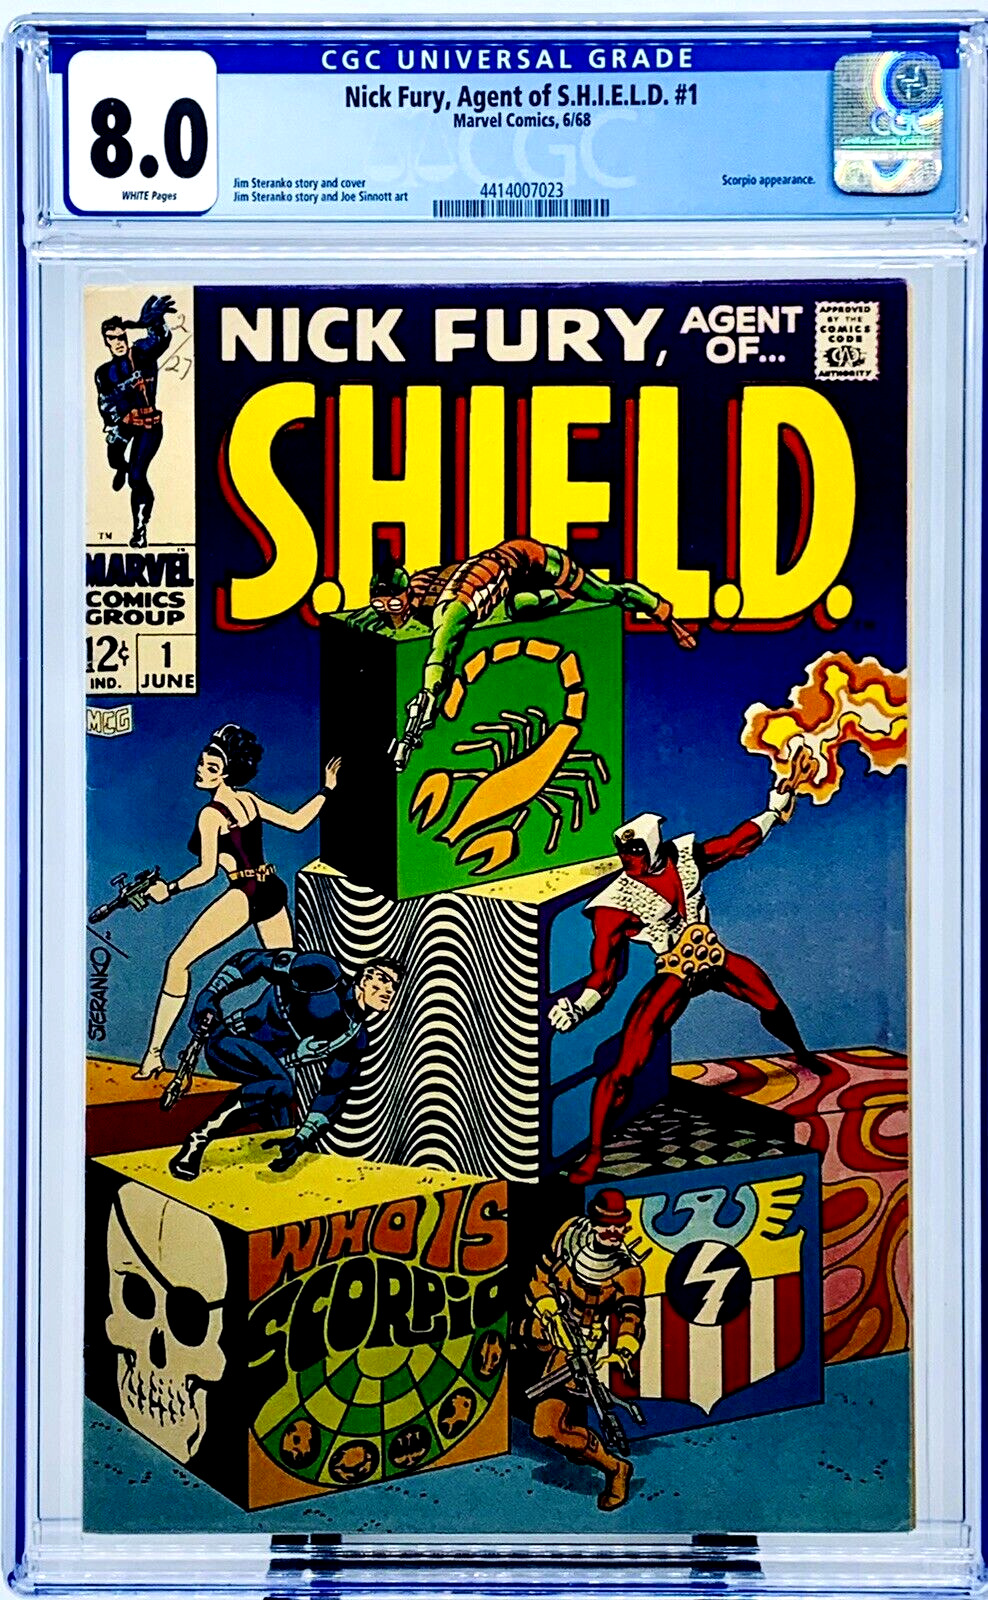 NICK FURY AGENT of SHIELD #1 CGC 8.0 WHITE PAGES 1968 Steranko JUST GRADED